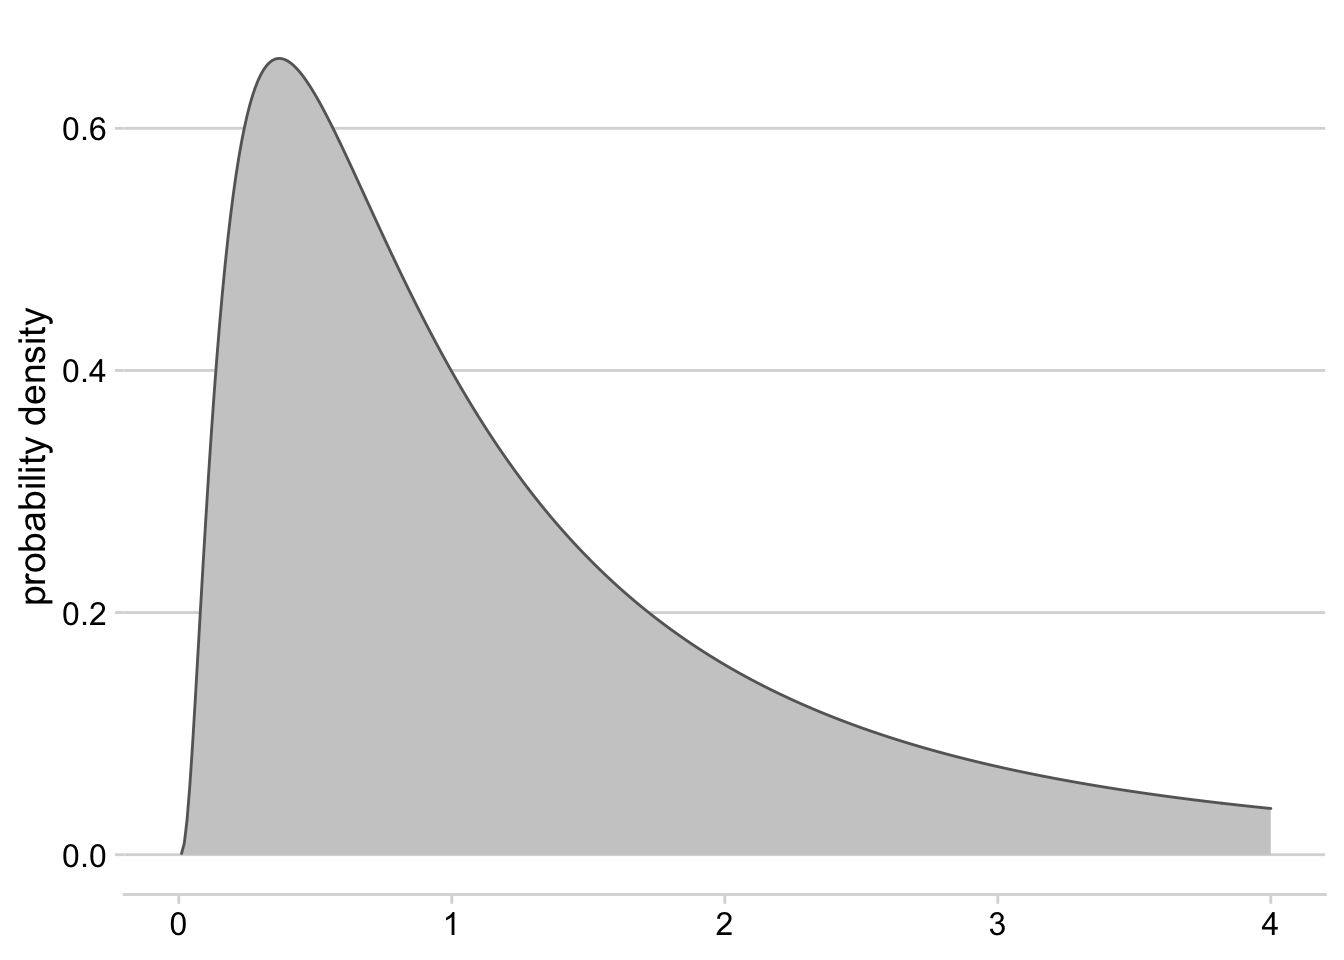 Density plot for a log-normal distribution with mean = 0 and standard deviation = 1